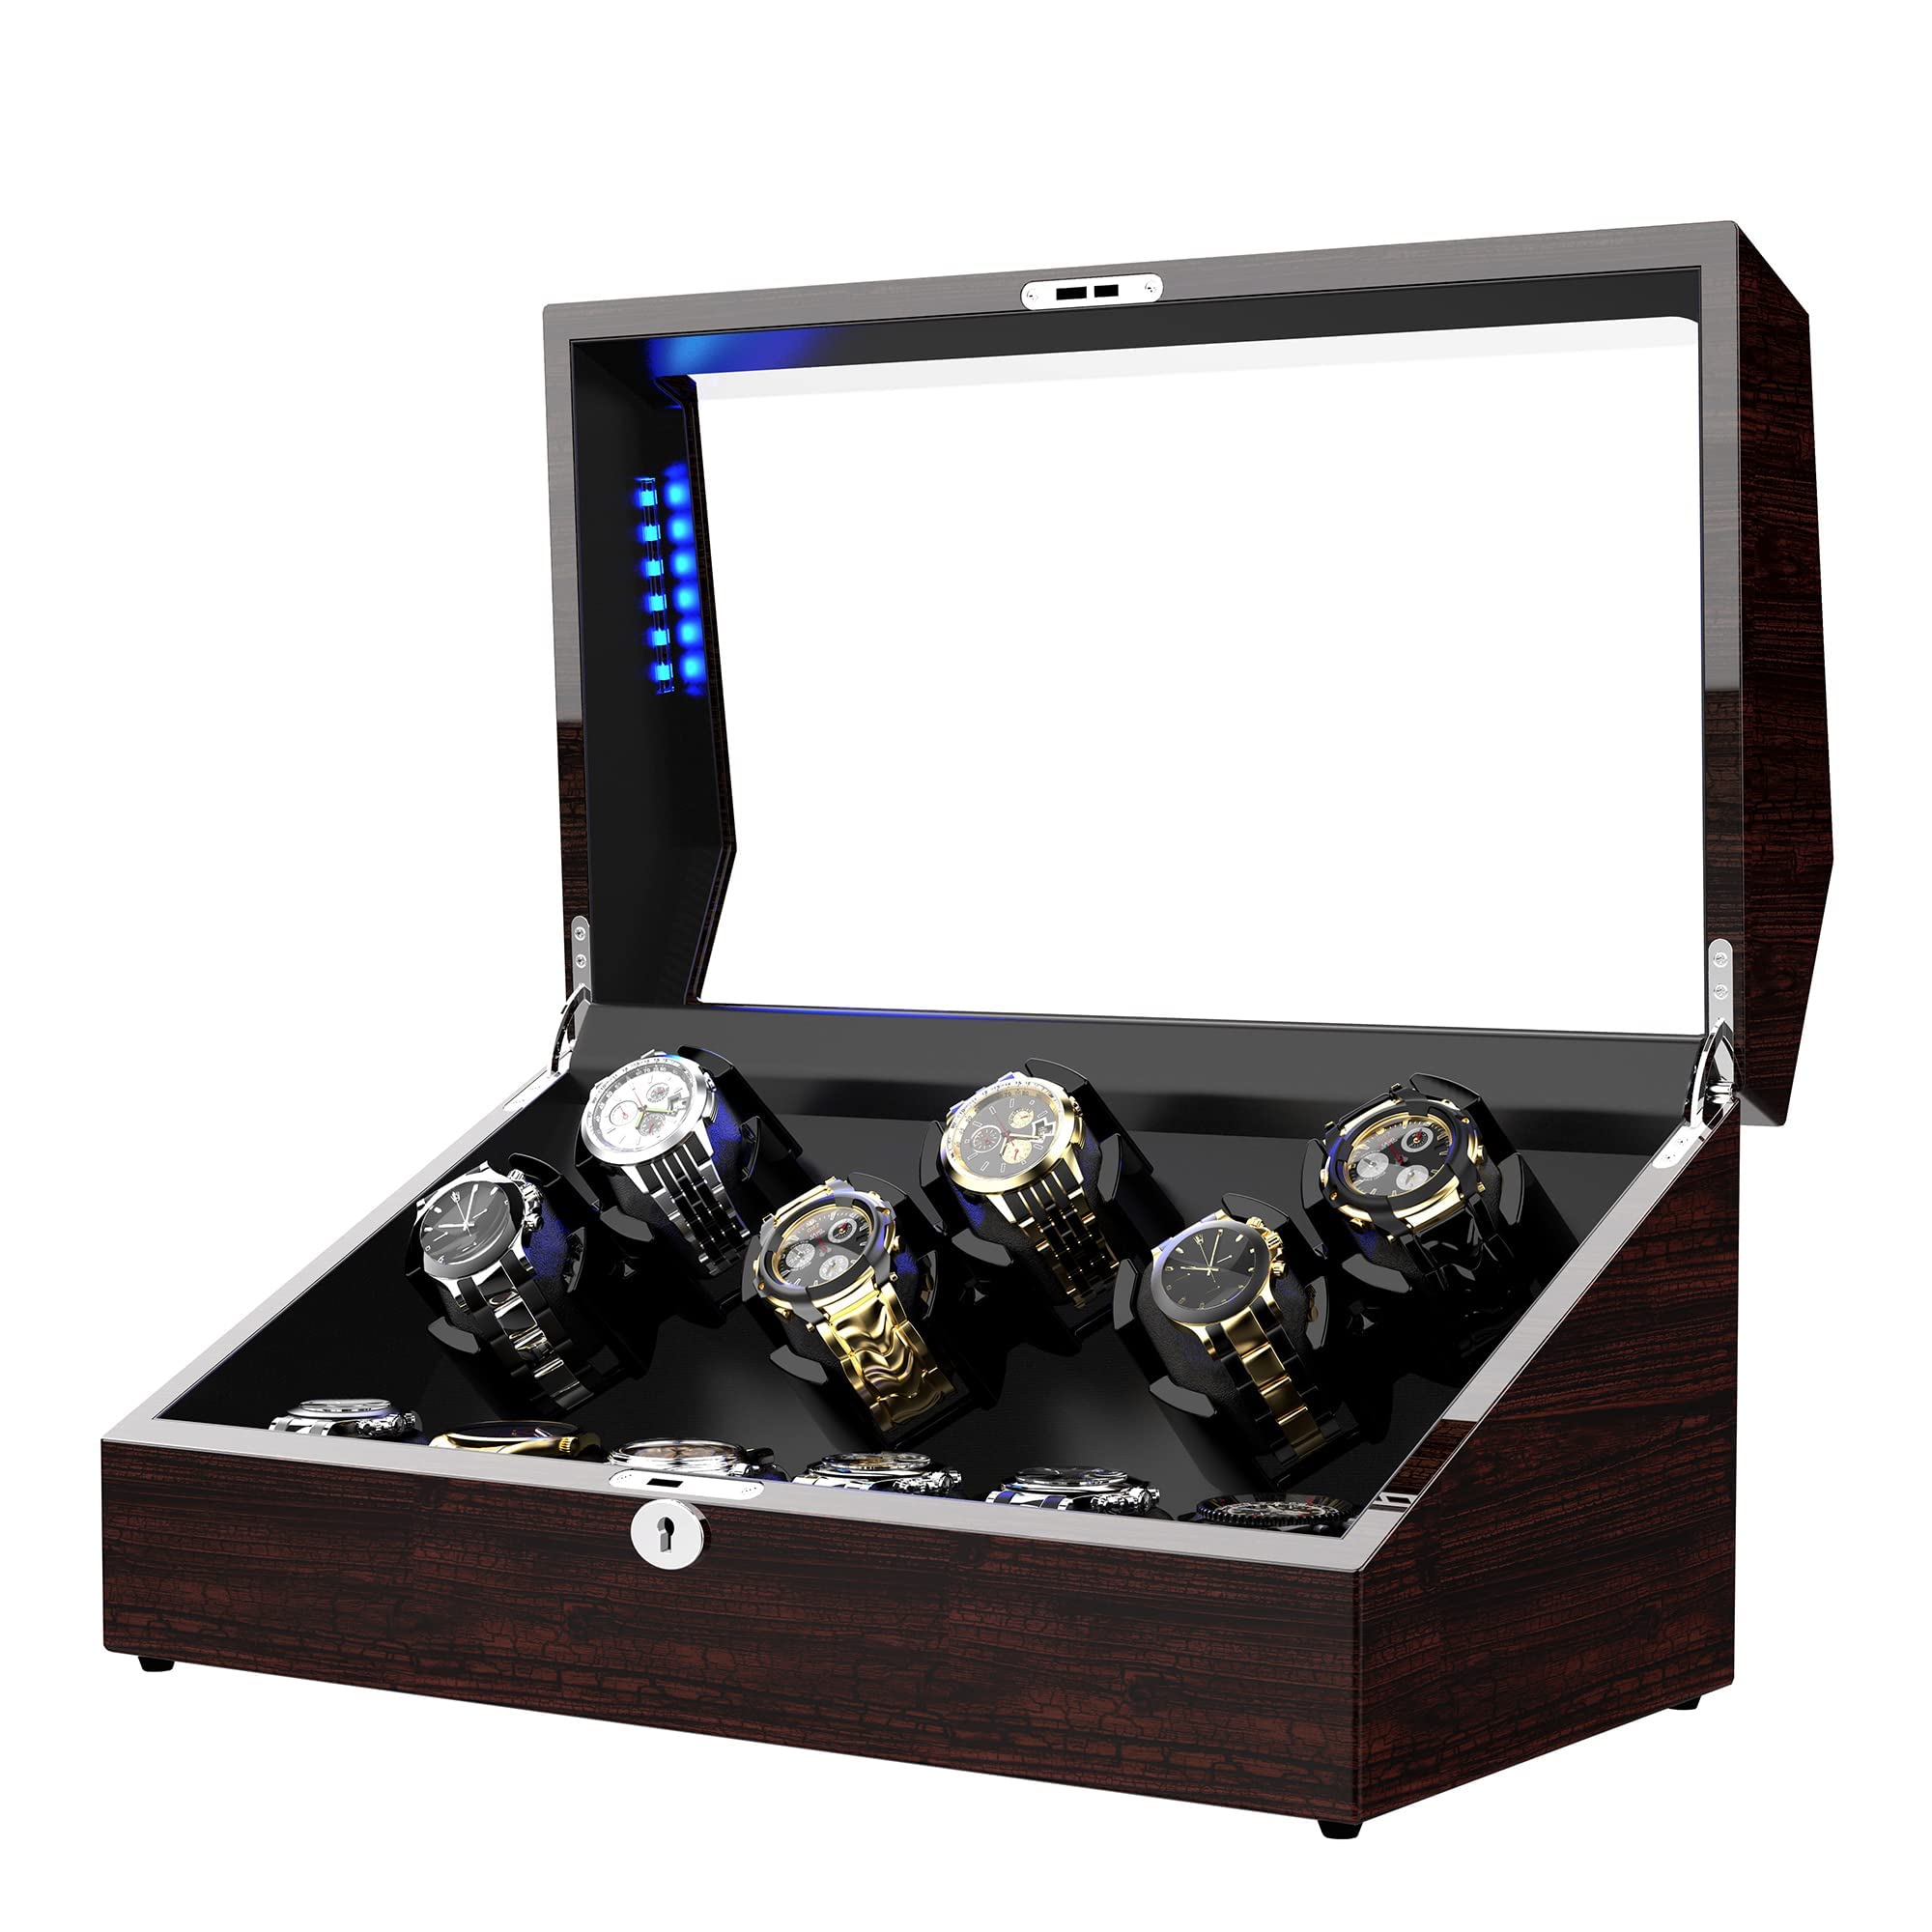 ARCTICSCORPION Watch Winder for 12 Storages, Wood Shell Piano Paint Exterior and Extremely Silent Motor, with Soft Flexible Watch Pillow, Built-in Illumination